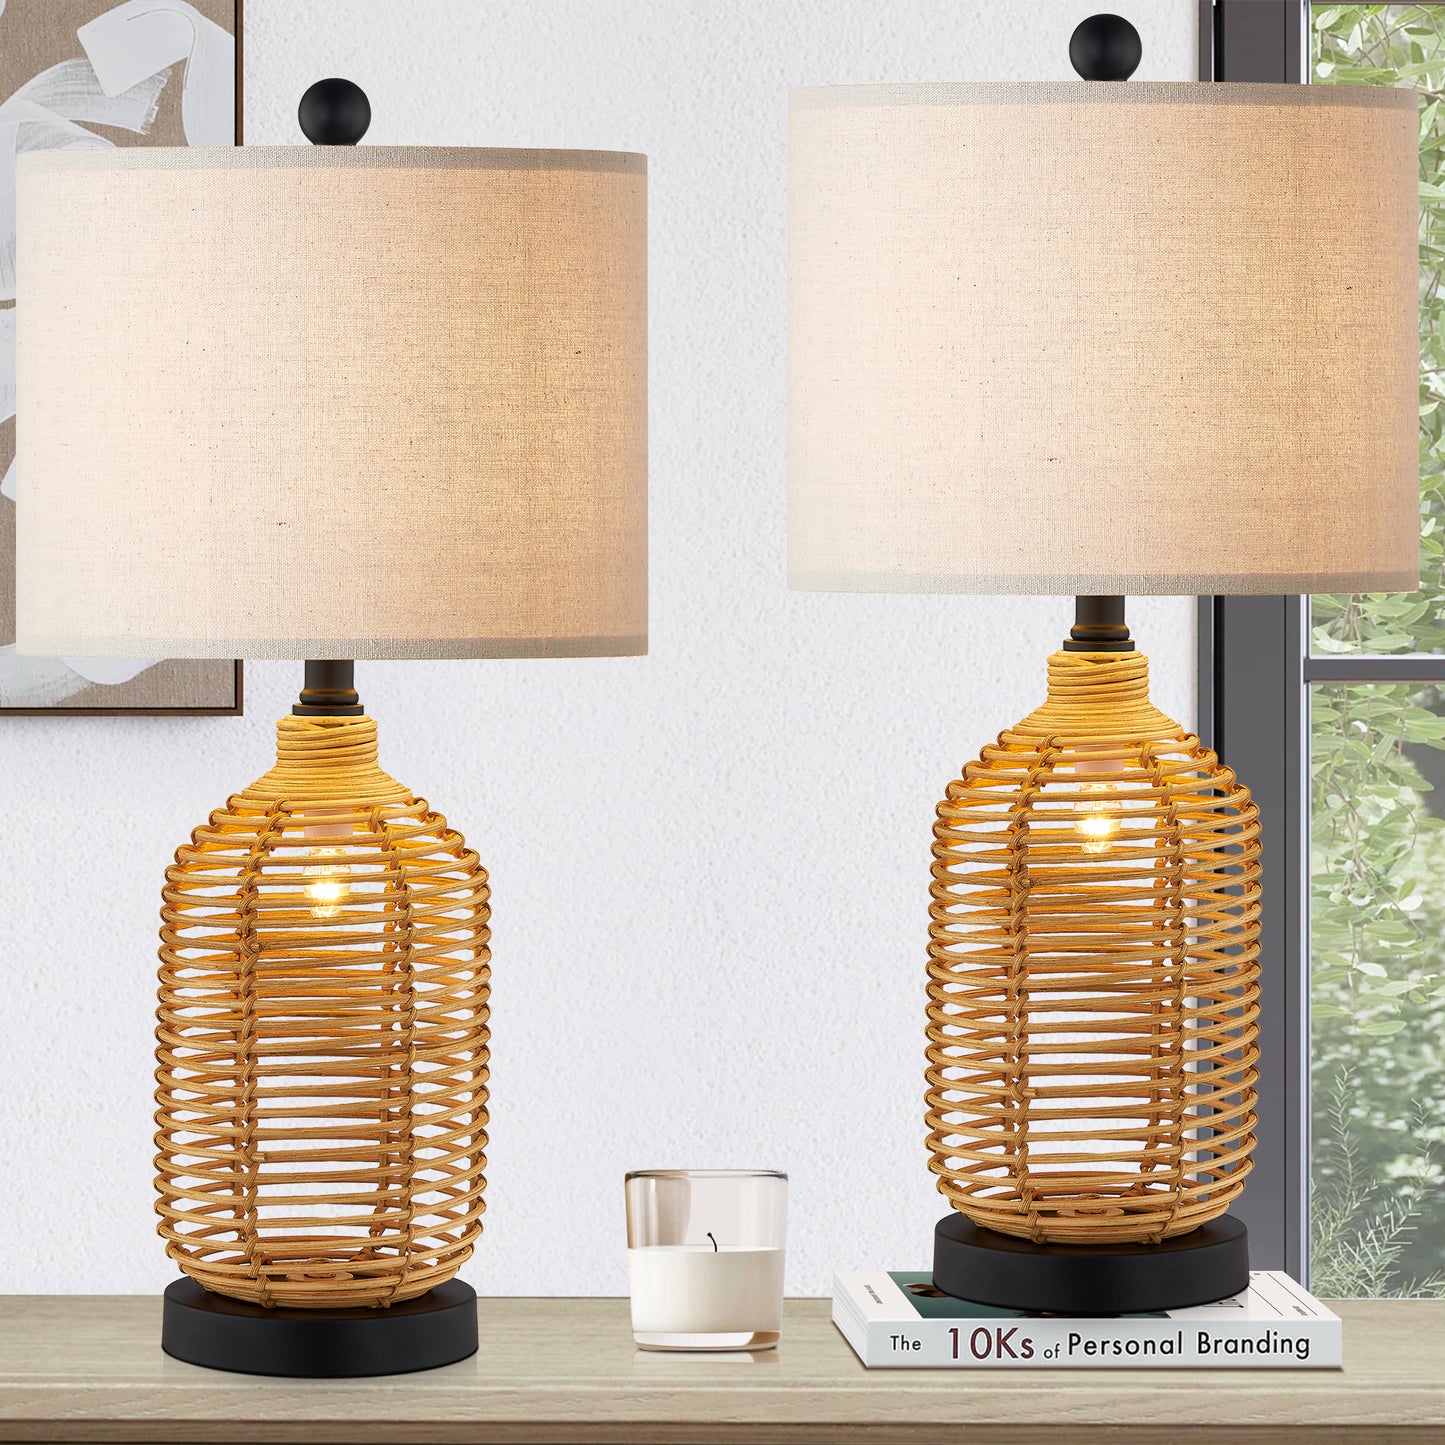 Twinset Versatile Rattan Table Lamp with 3-Way Rotary Switch & Dual Lighting Modes